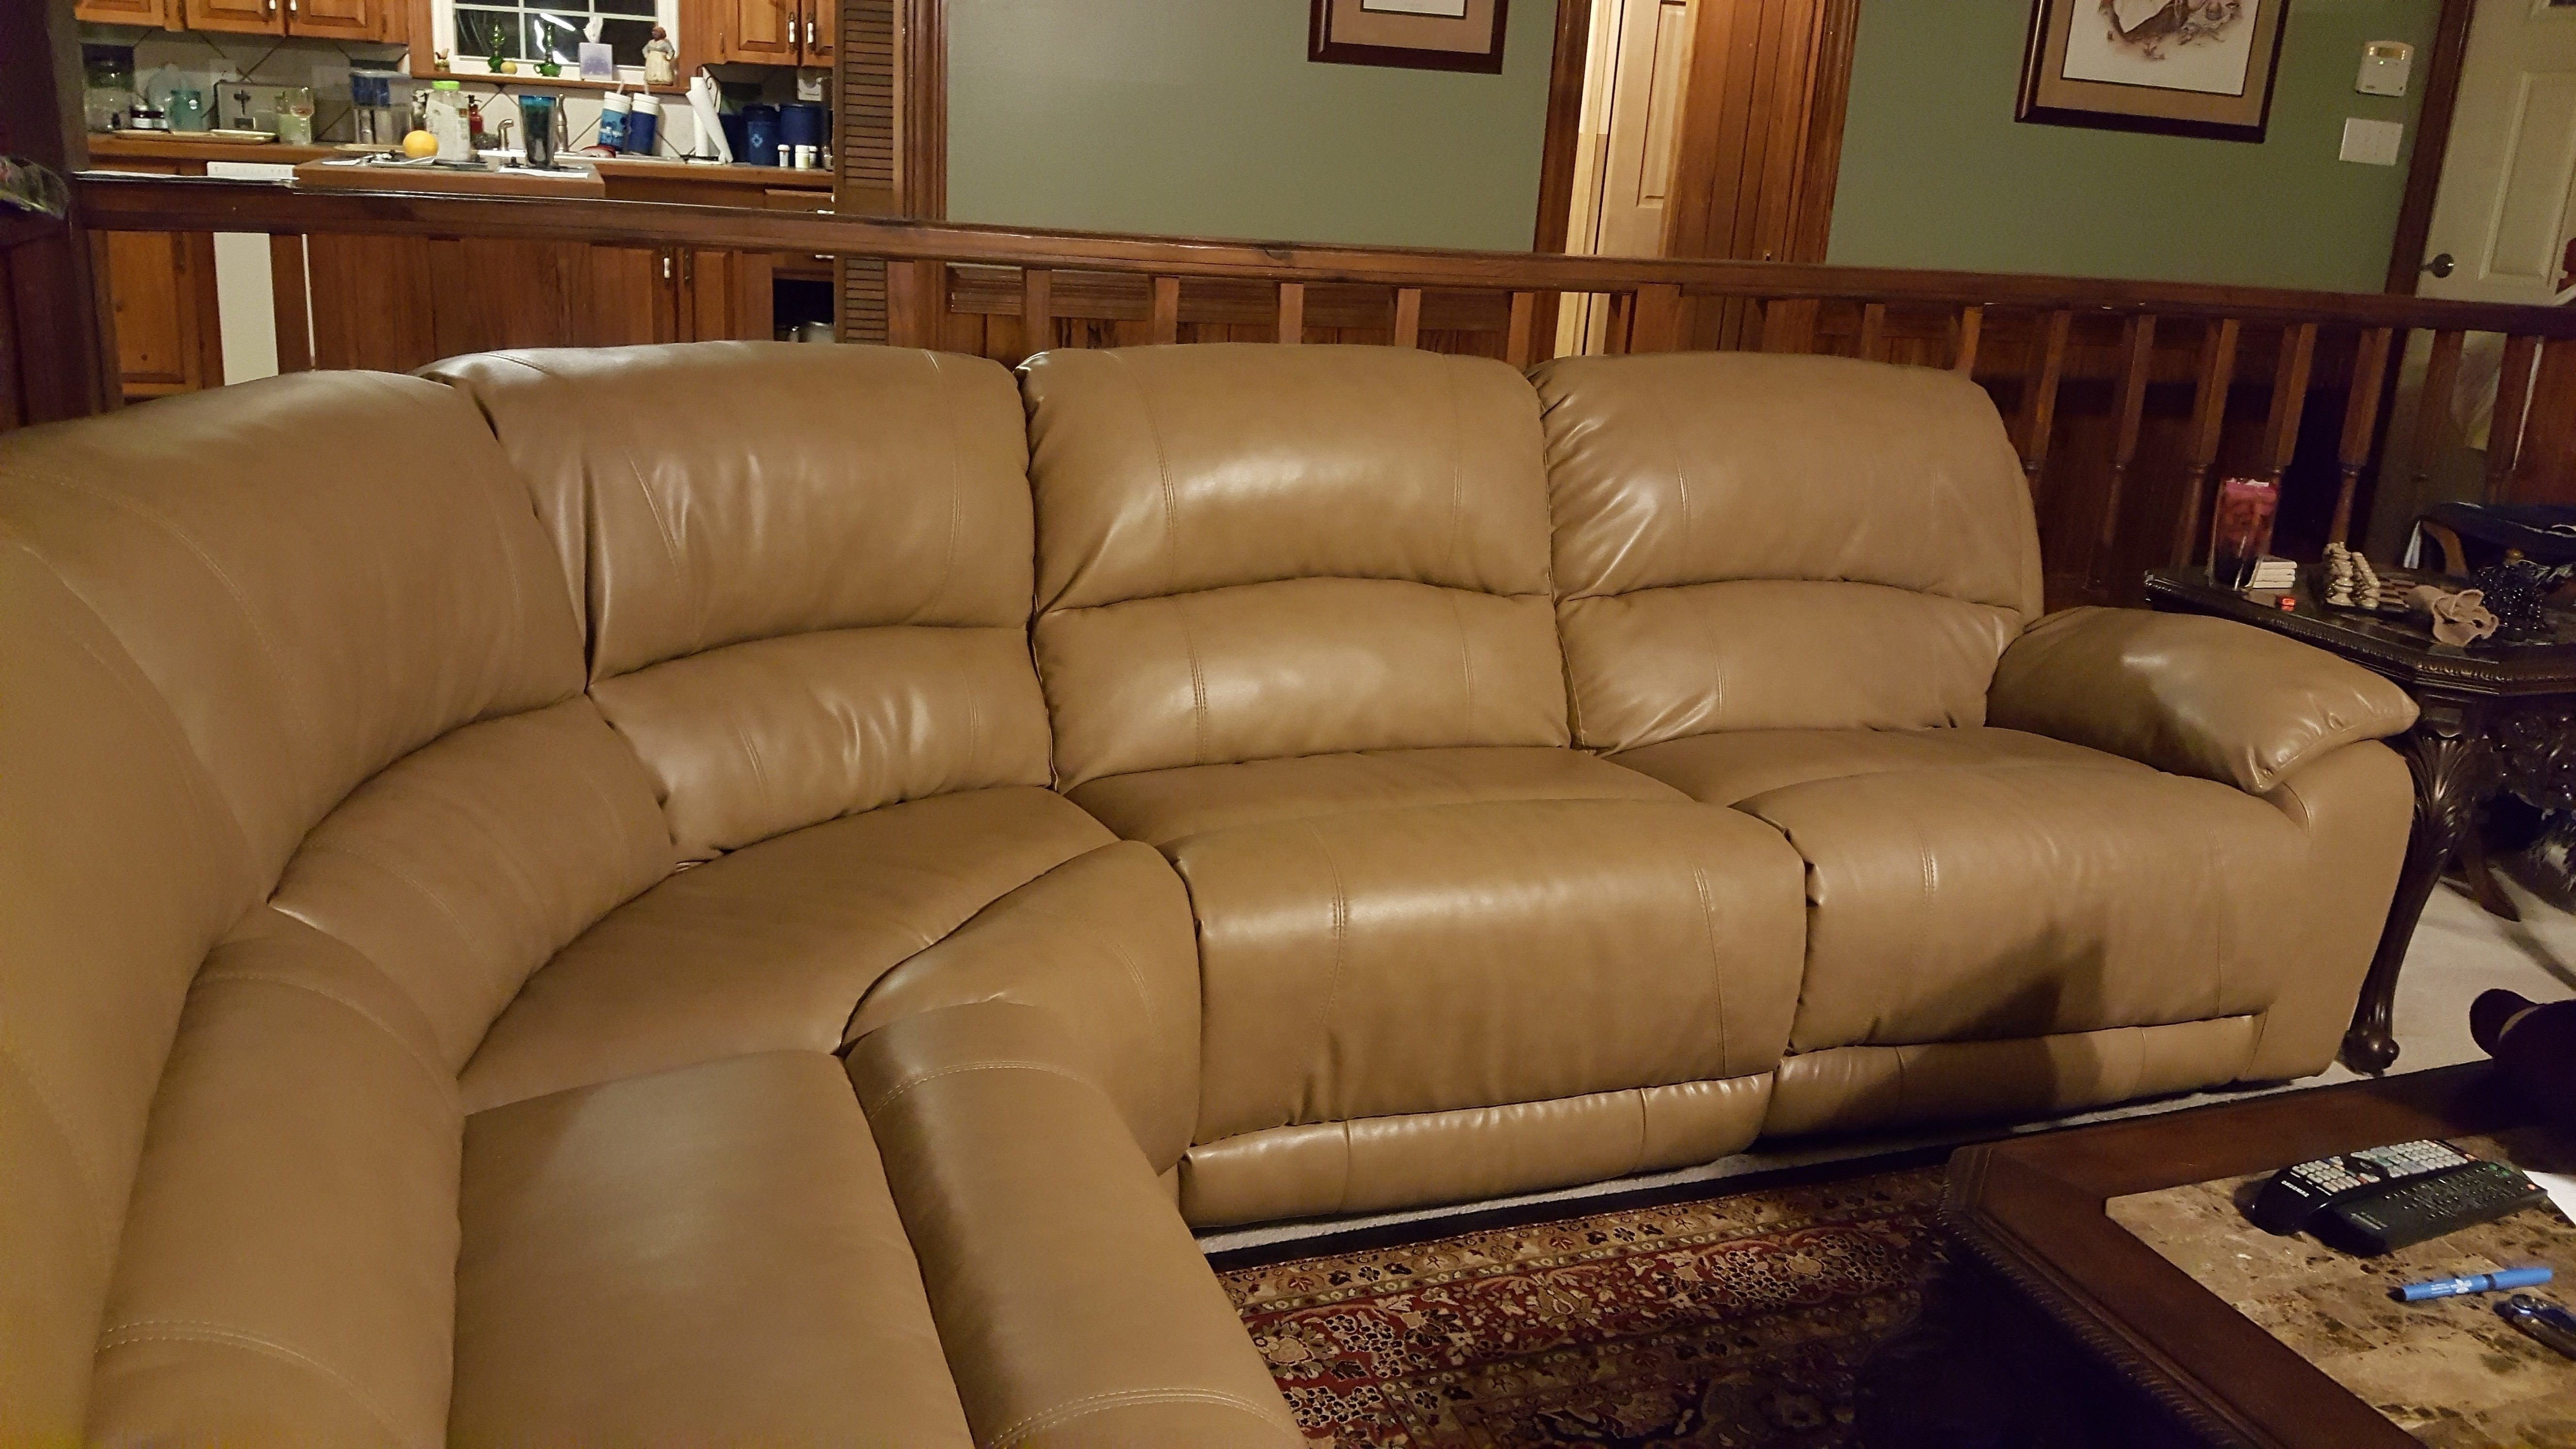 Rooms To Go Sectional Sofas With Regard To Widely Used Rooms To Go Couches – Free Online Home Decor – Techhungry (View 10 of 20)